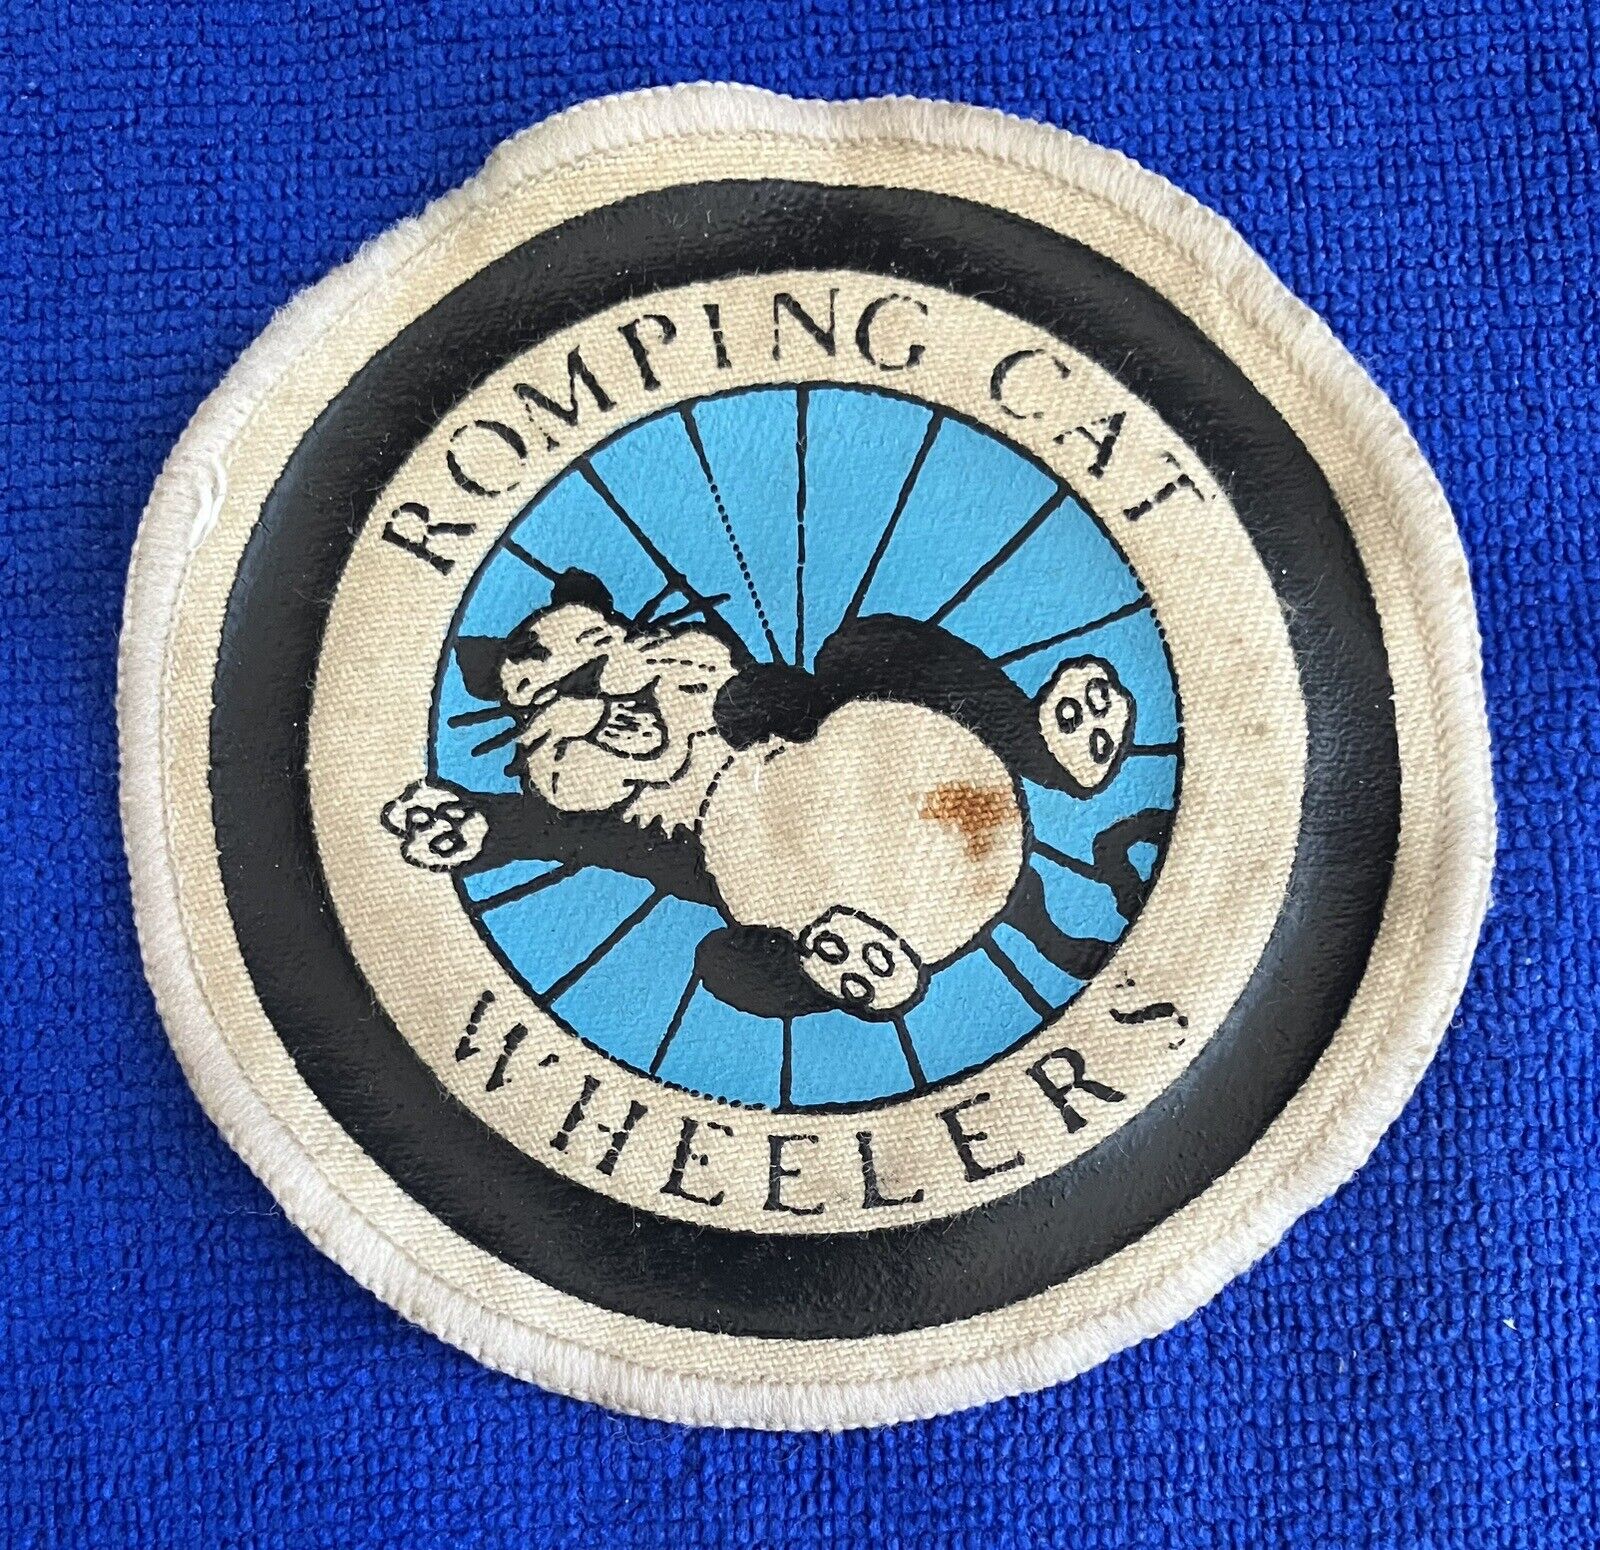 Romping Cat Wheelers - Vintage Sew On Patch - Cycling Club - Free Postage